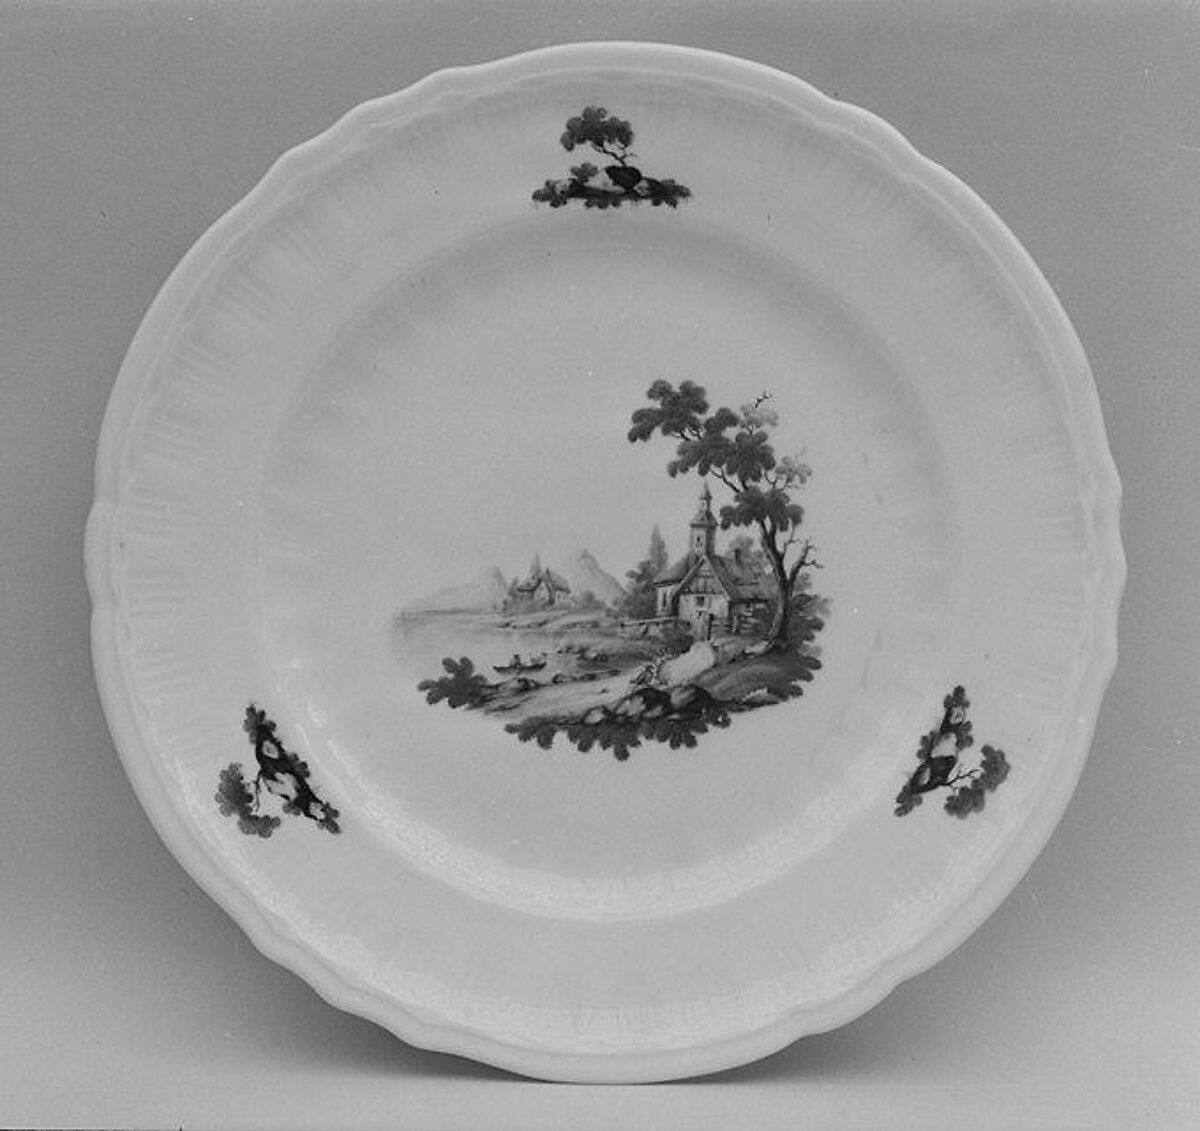 Plate, Zurich Pottery and Porcelain Factory (Swiss, founded 1763), Hard-paste porcelain, Swiss, Zurich 